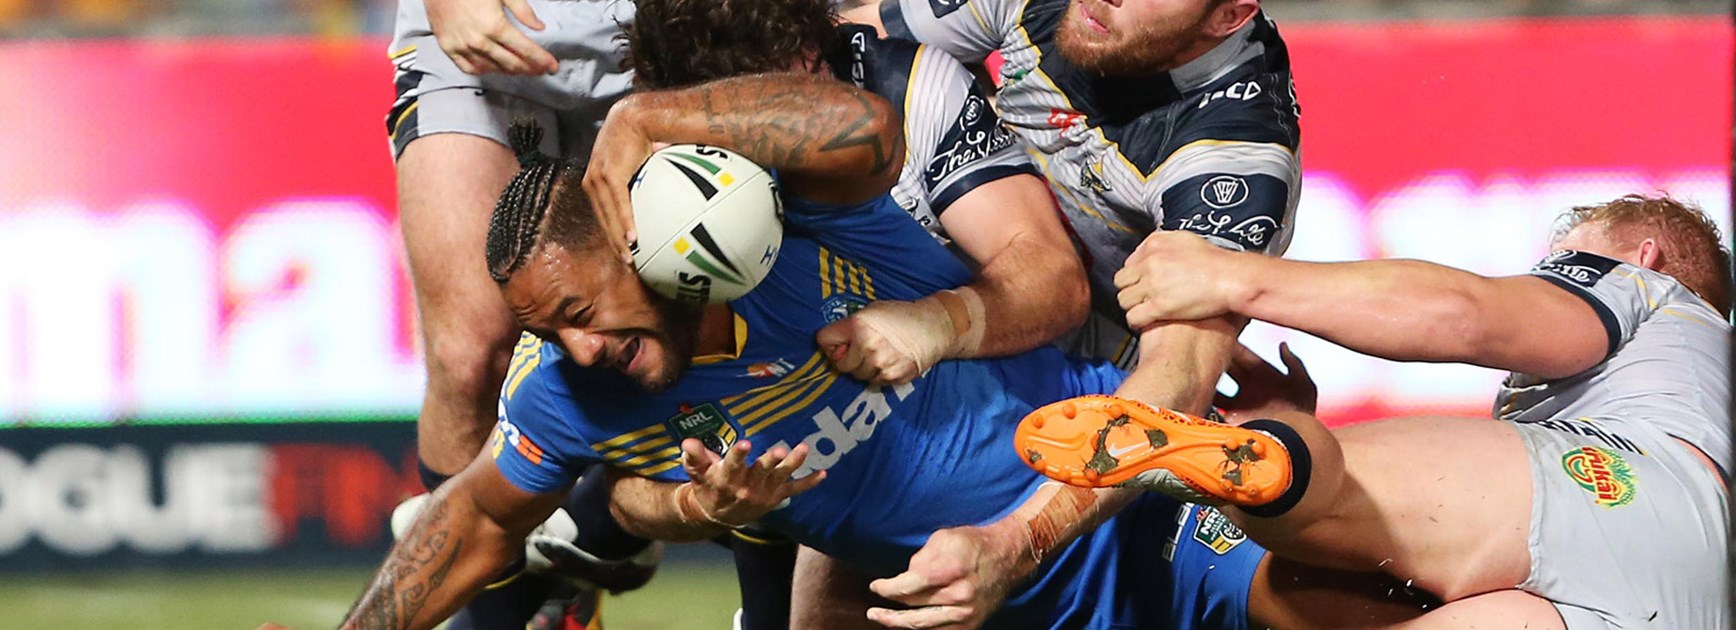 Kenny Edwards scored an important try for the Eels against the Cowboys.